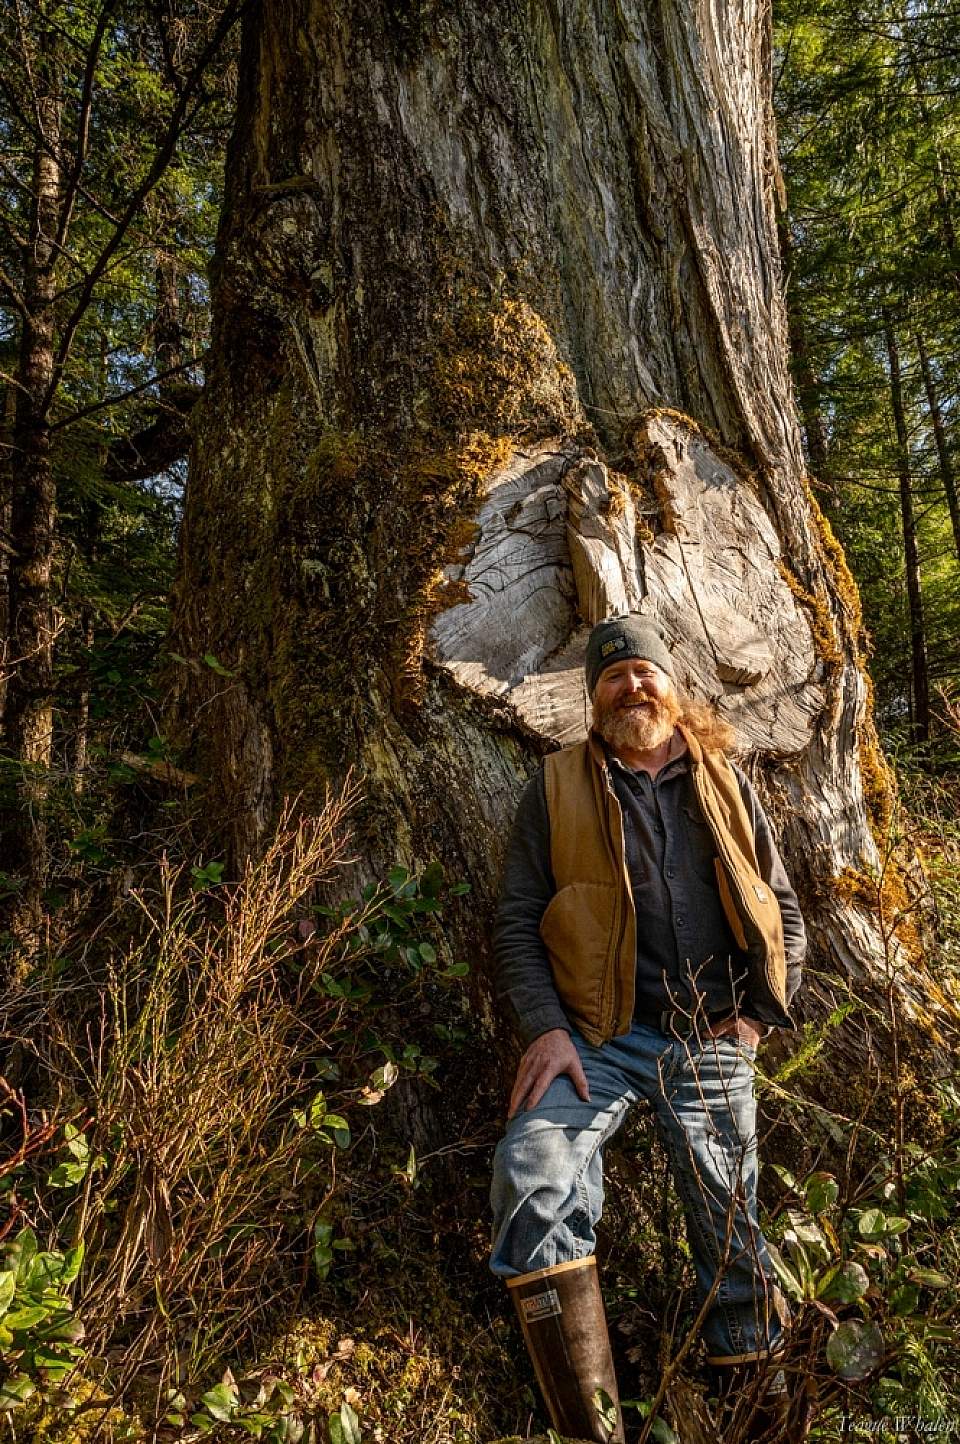 Owner/operator Teague Whalen stands in the Tongass National Forest at the base of an old-growth western red cedar that is several hundreds of years old.